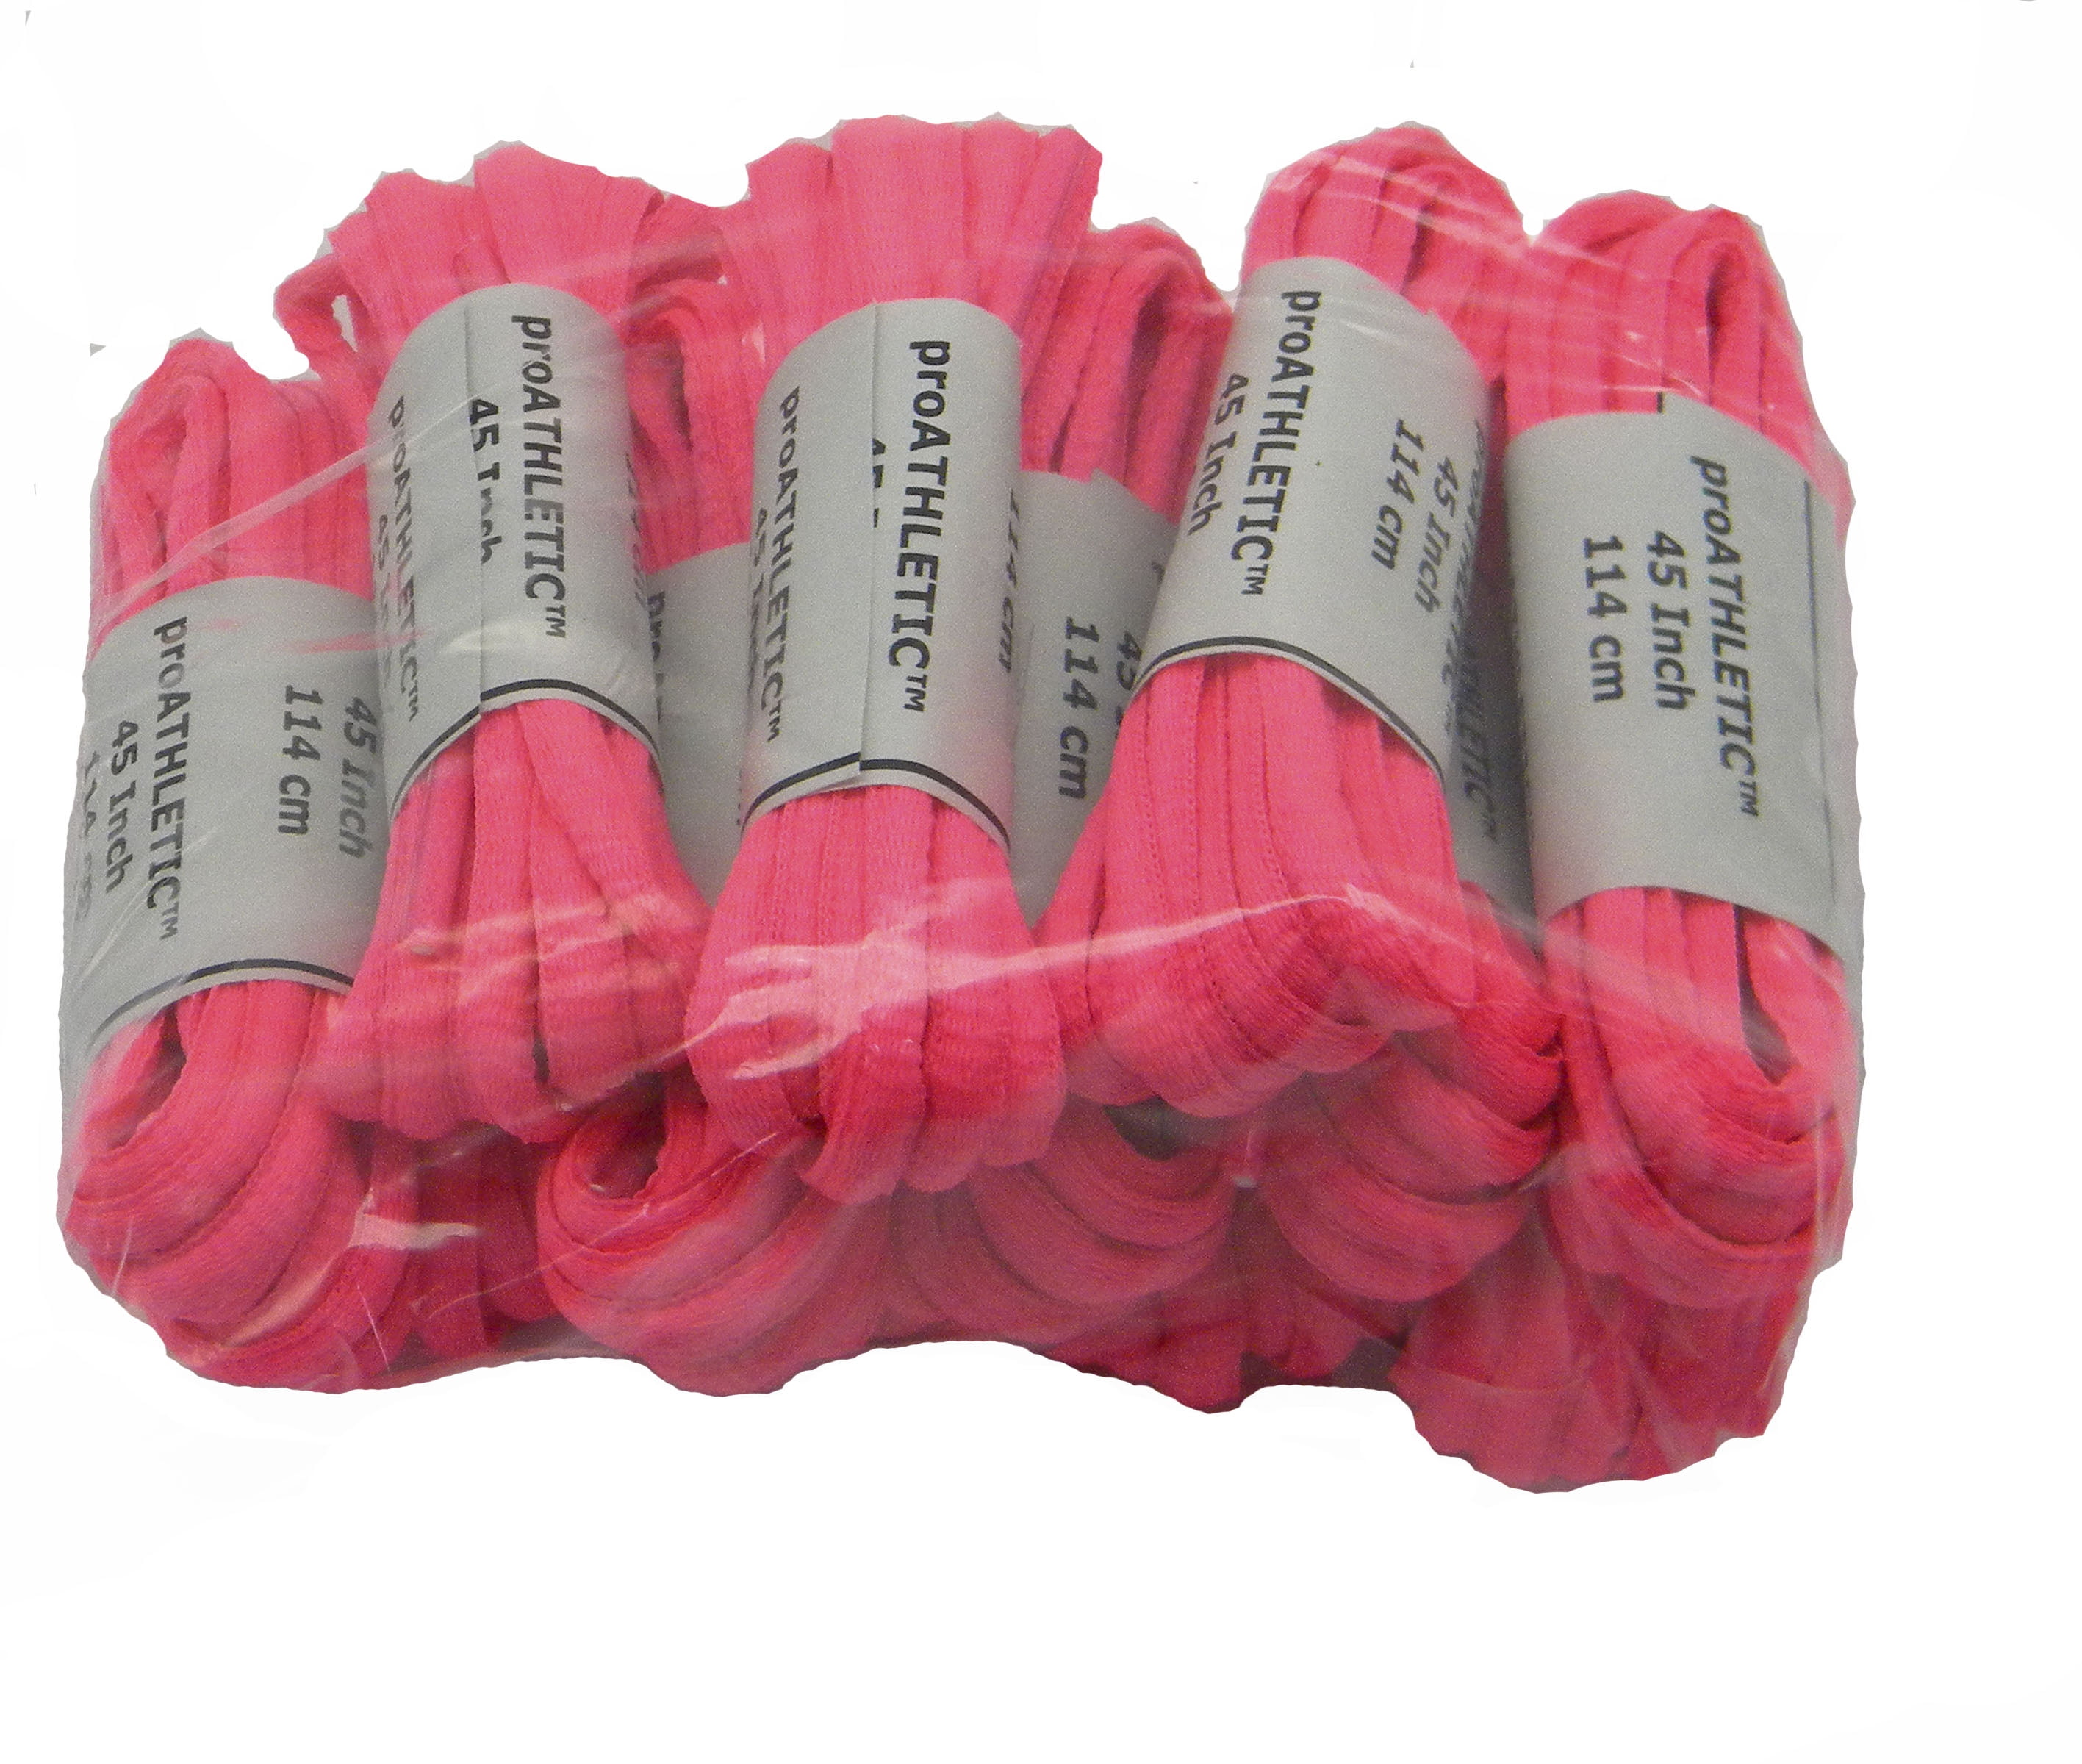 tm tm 12 Pair Pack OVAL proATHLETIC 6mm Shoelaces Bulk pack Neon Pink TEAMLACES Support Cancer Awareness! 